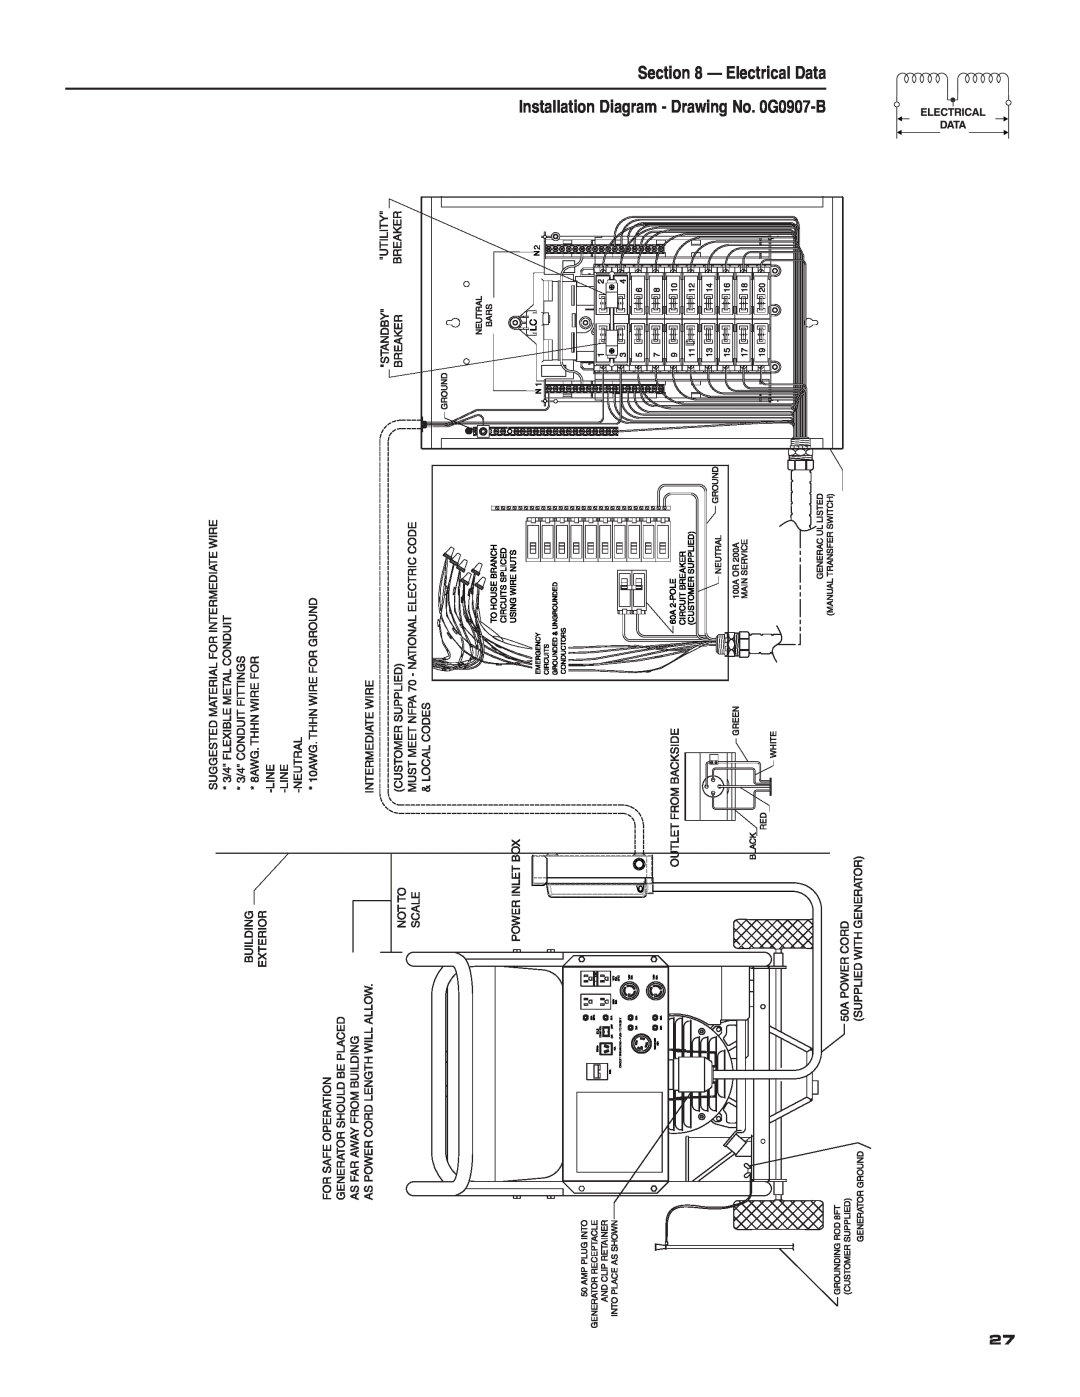 Guardian Technologies 004583-0 owner manual Electrical Data, Installation Diagram - Drawing No. 0G0907-B 